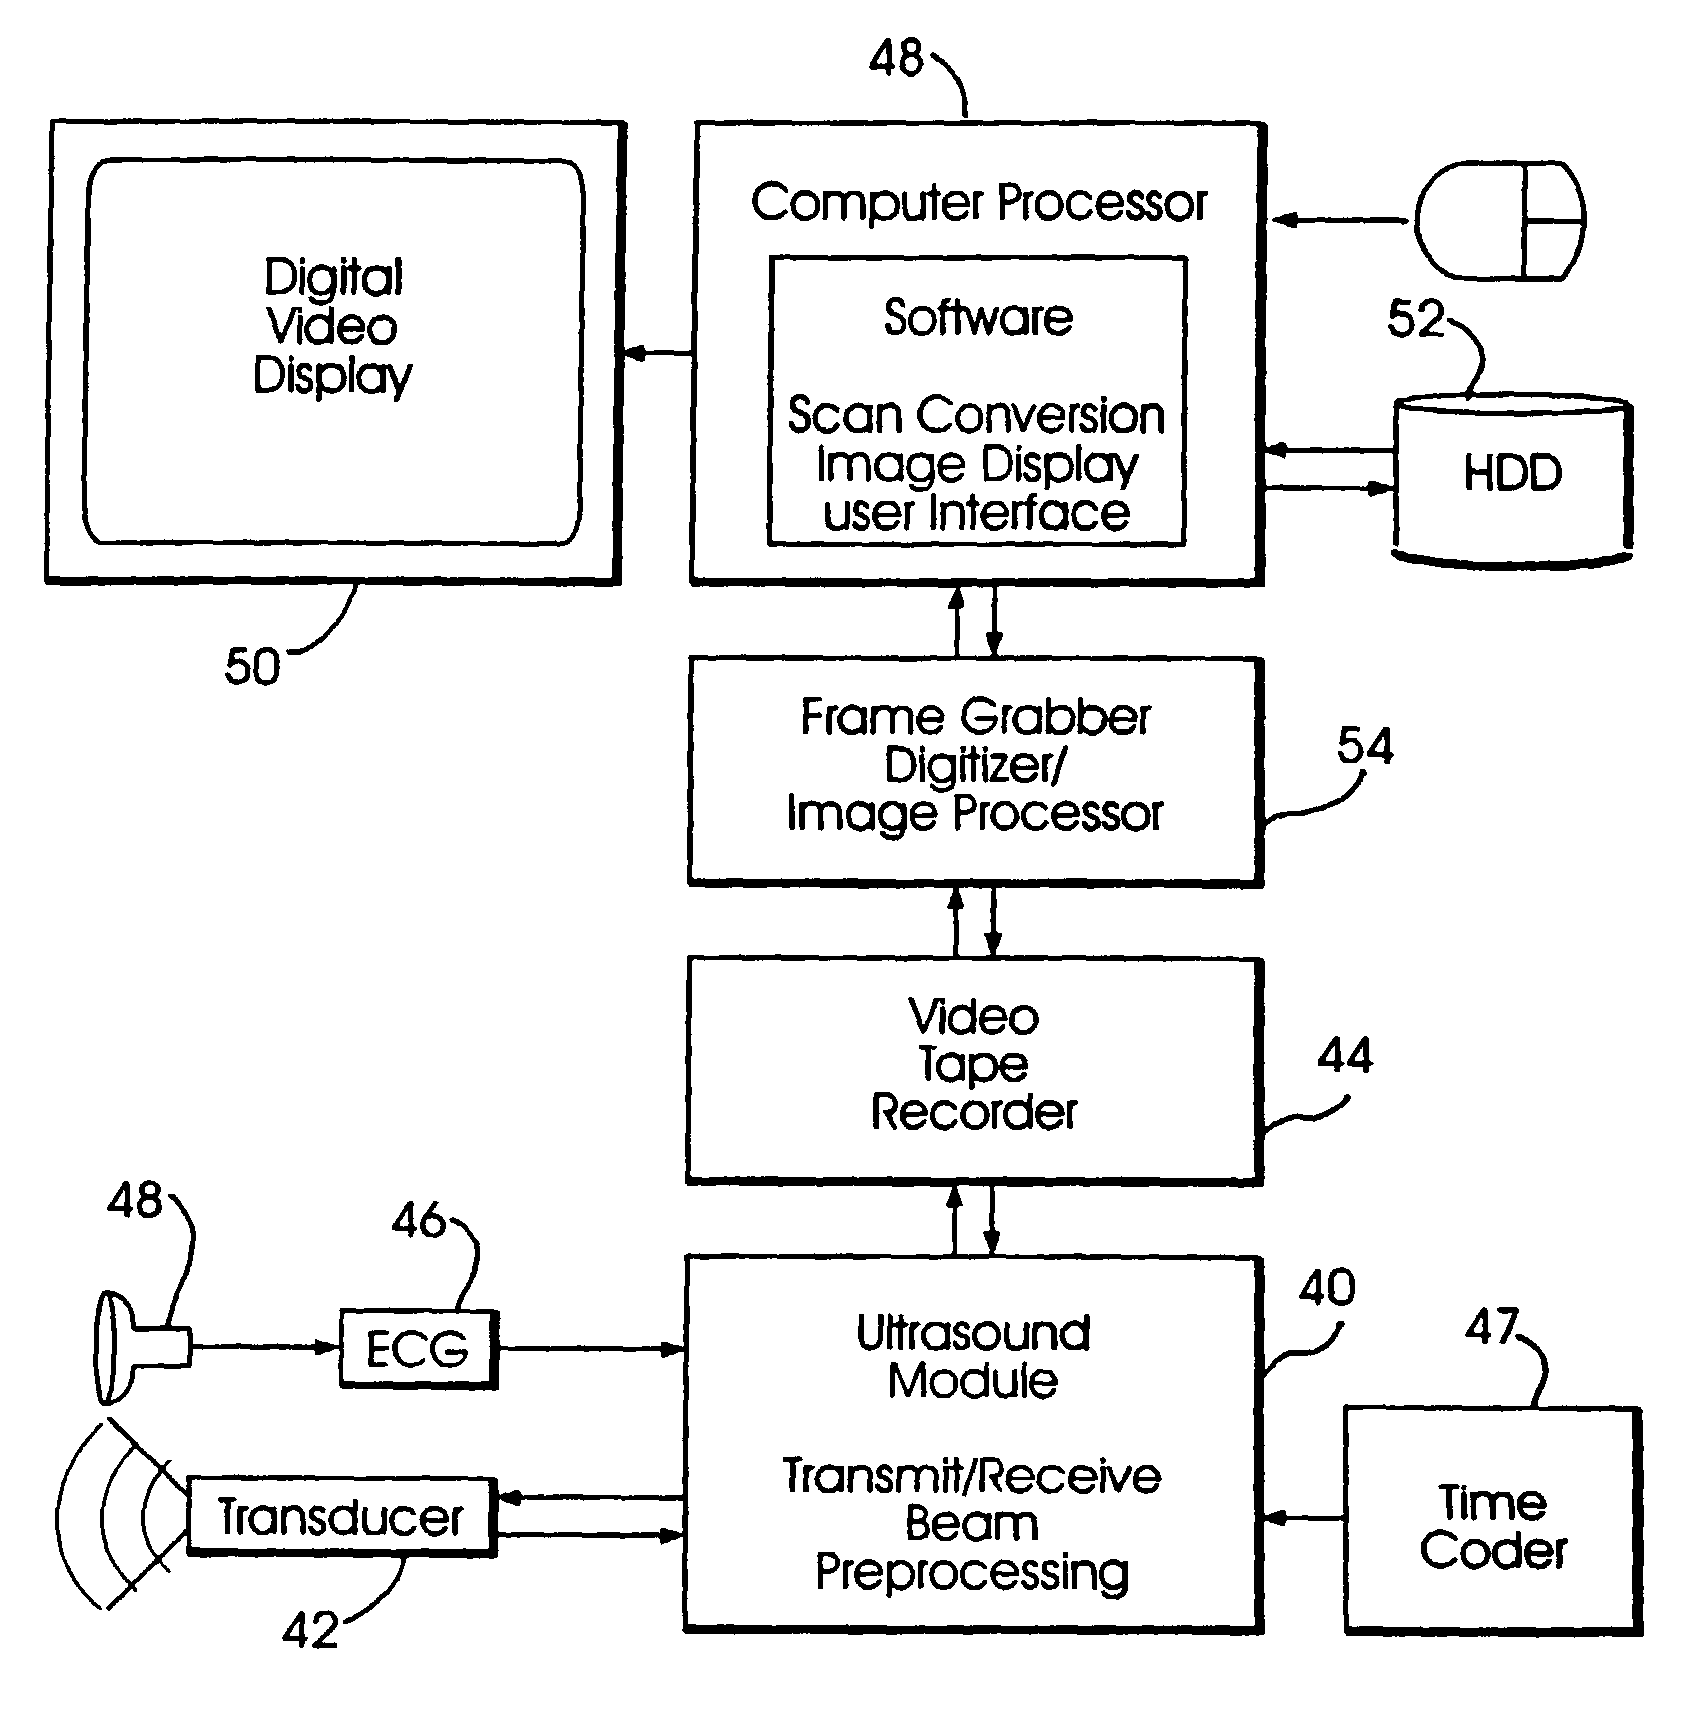 Split-screen display system and standardized methods for ultrasound image acquisition and multi-frame data processing